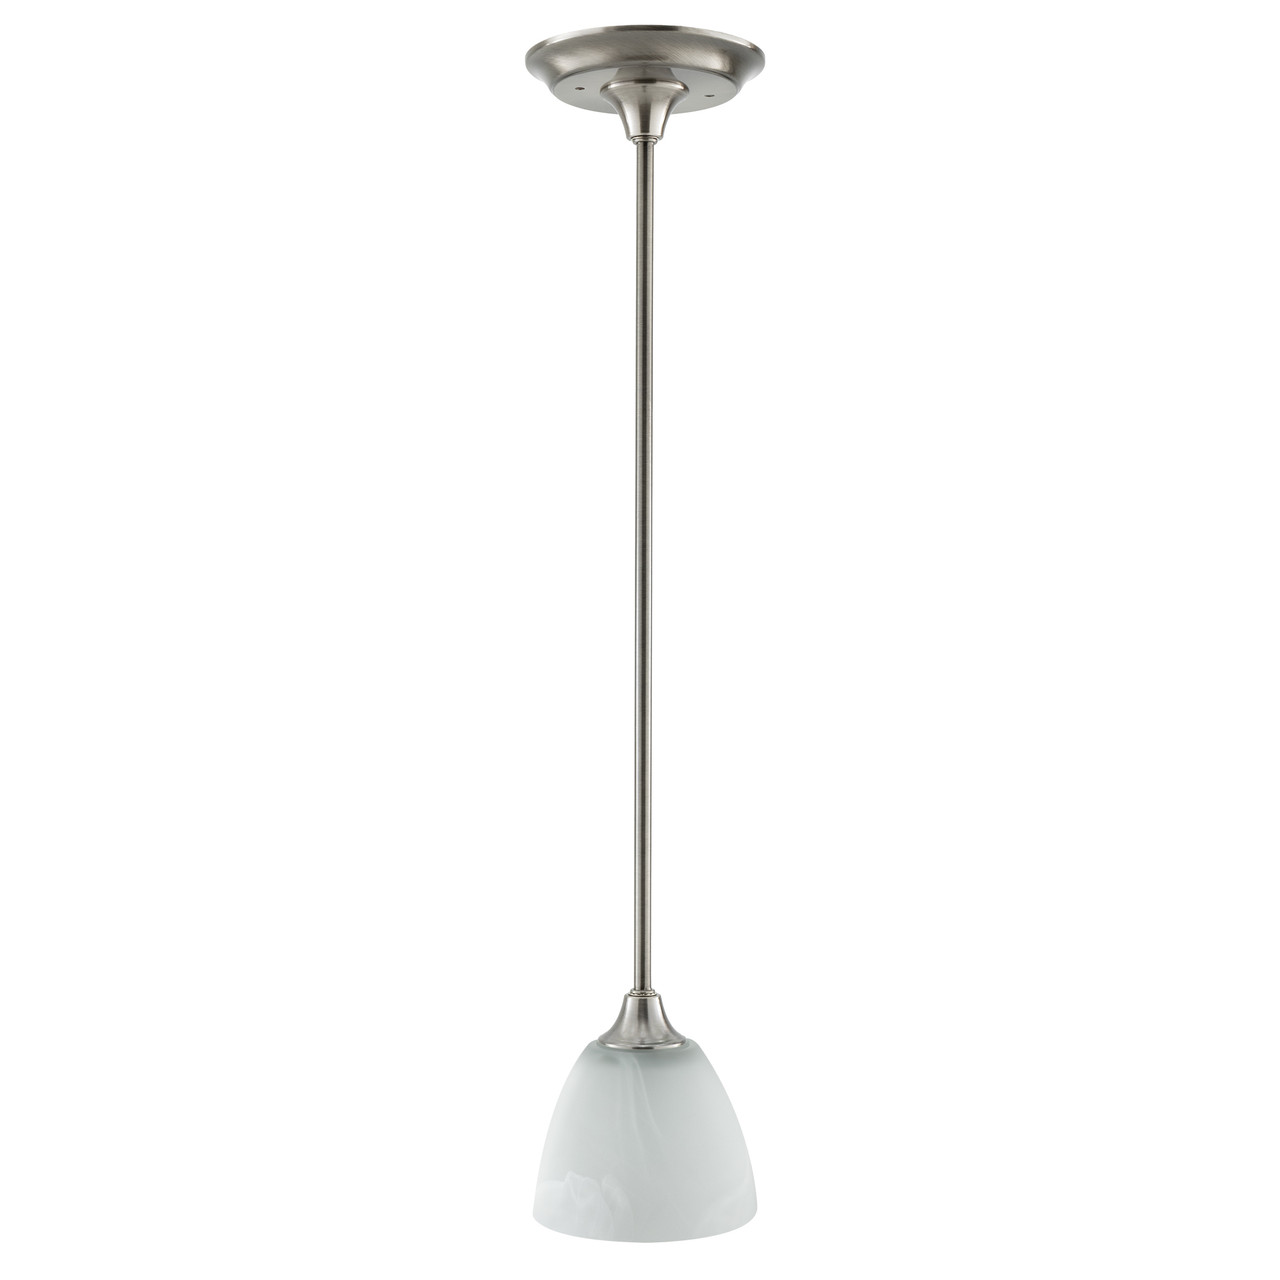 RV 12V Ceiling Mounted Pendant Light with Satin Nickel Finish